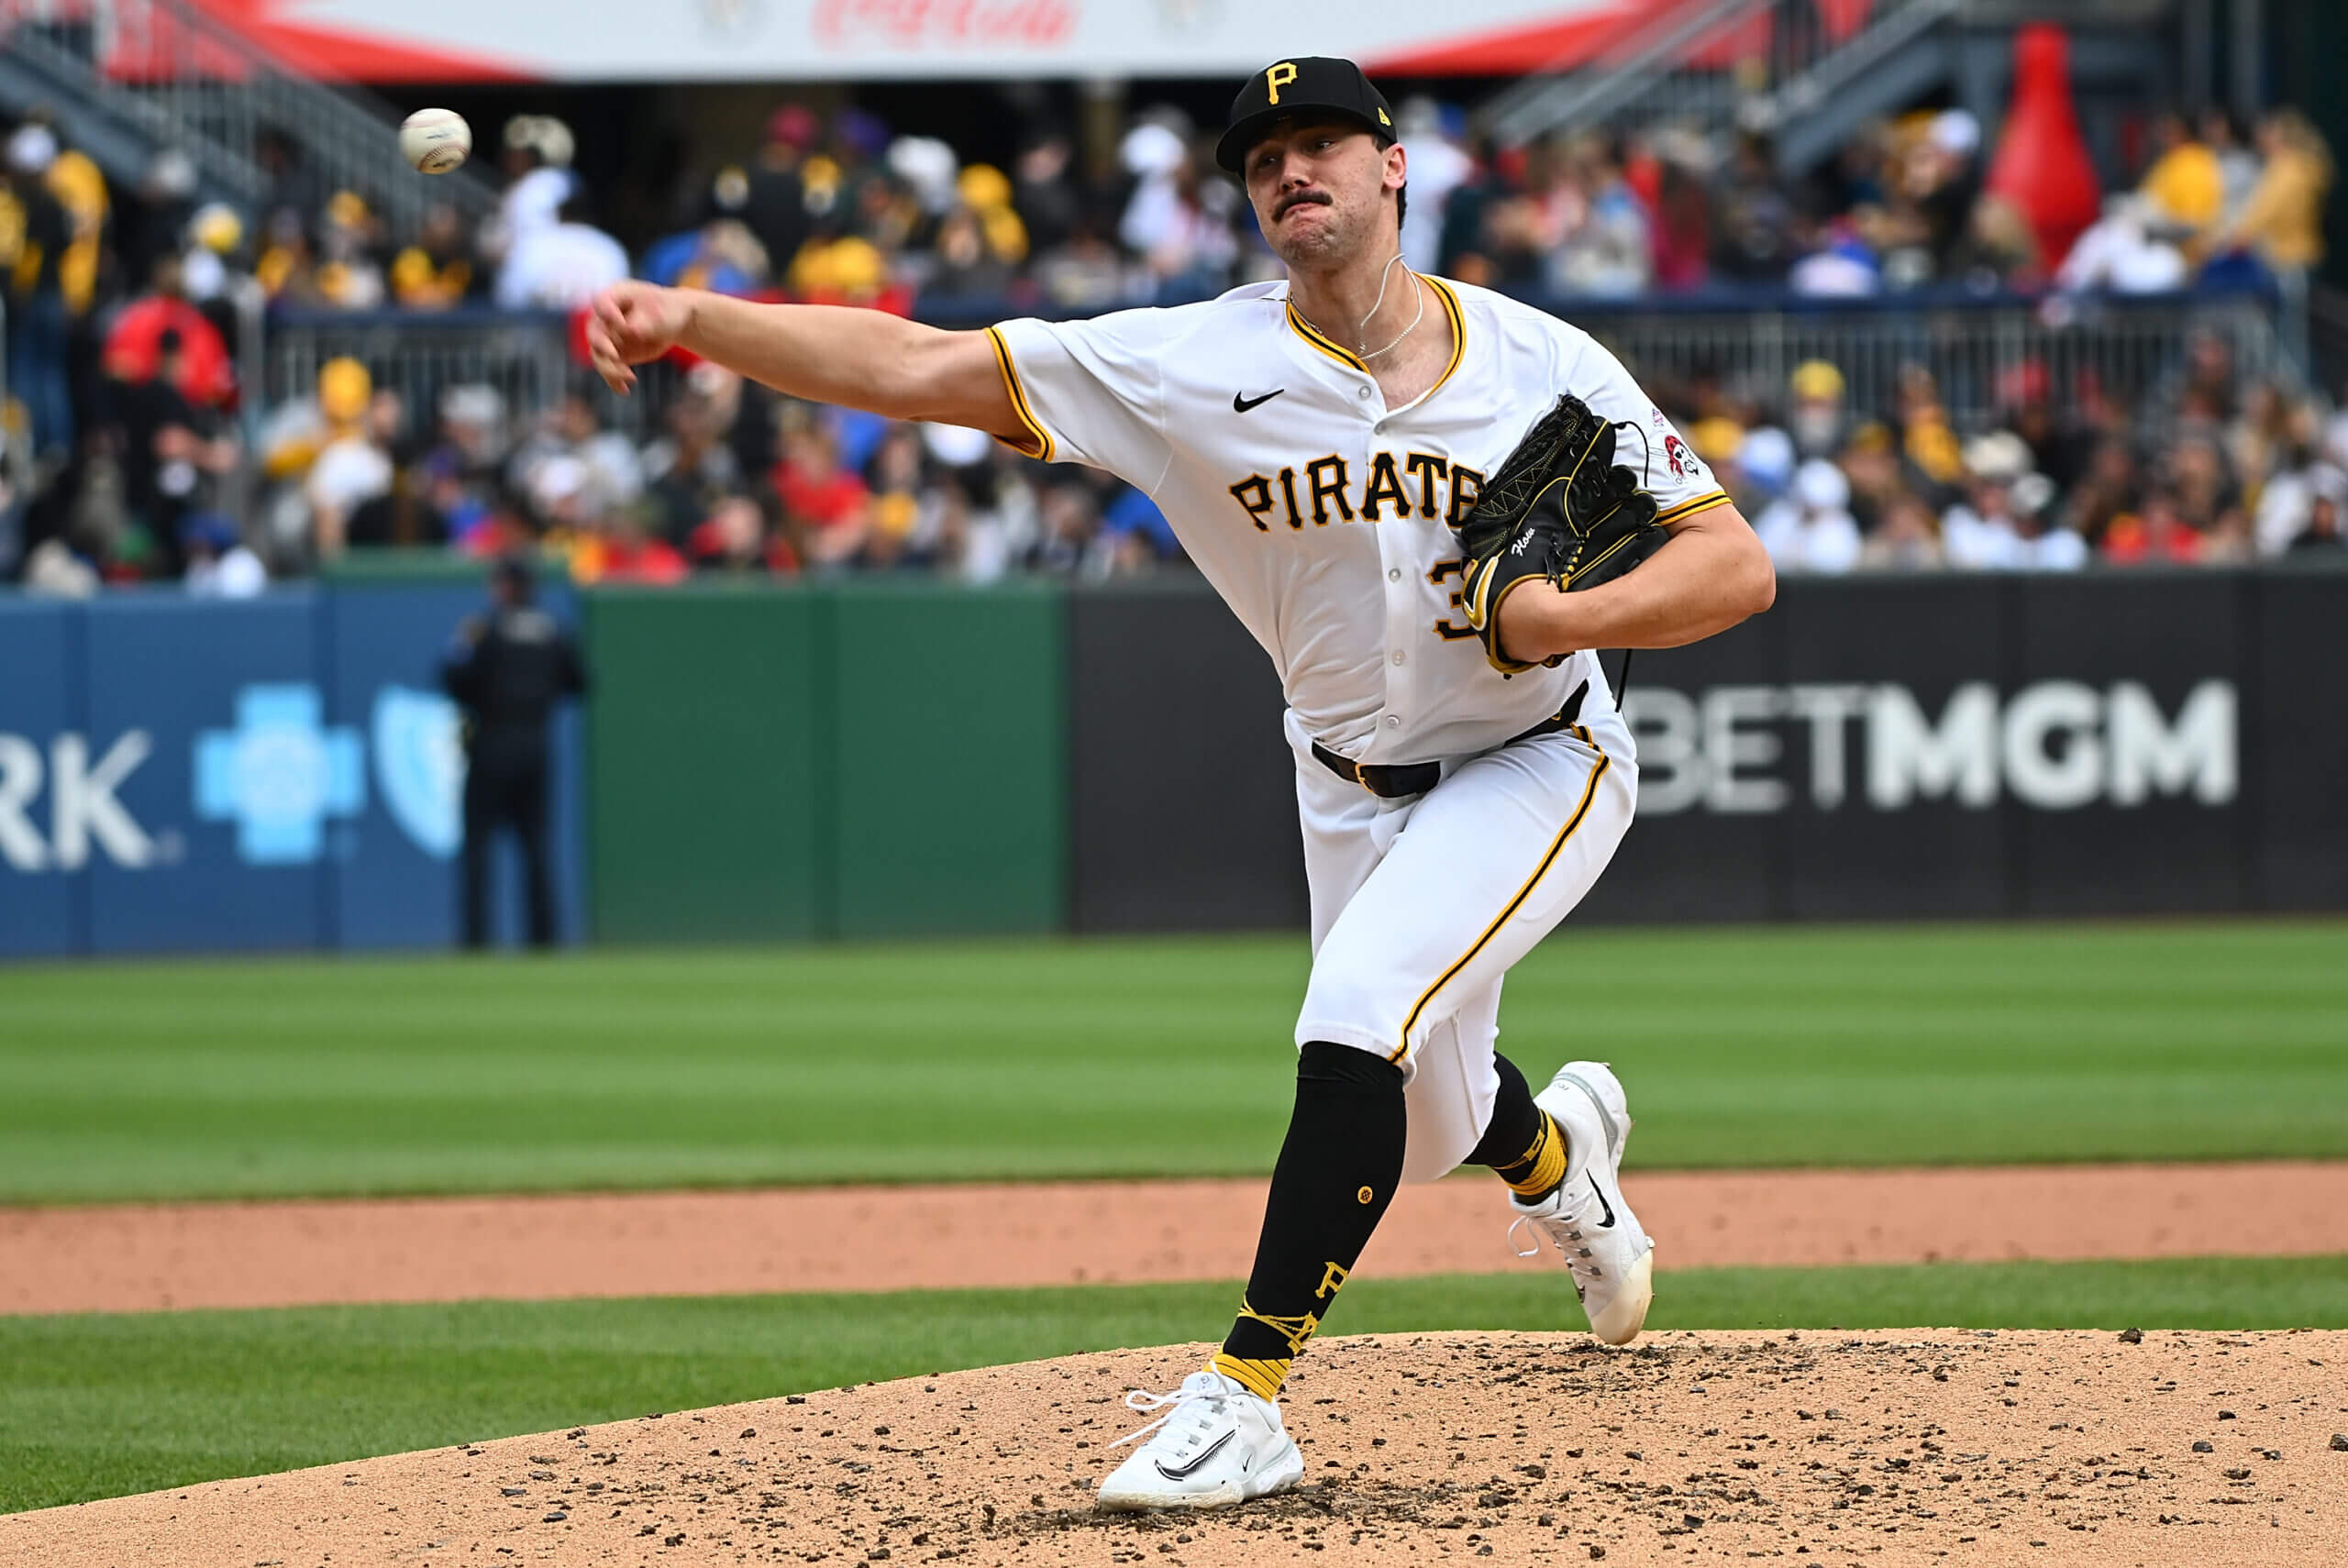 Pirates' Skenes strikes out 7, flashes dominance in MLB debut